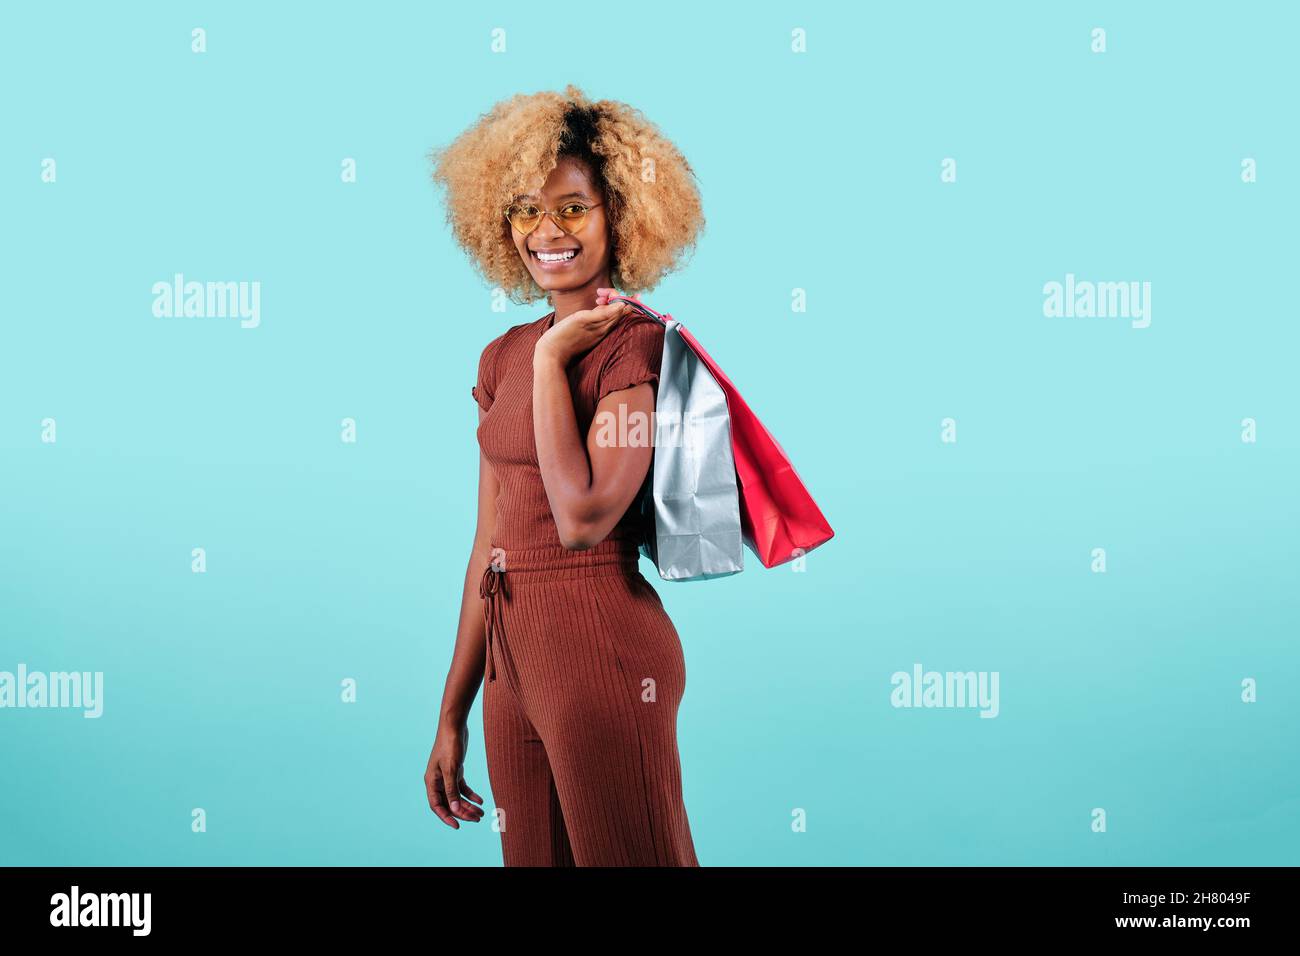 Smiling afro woman carrying colorful shopping paper bags over an isolated background. Black Friday sales concept. Stock Photo